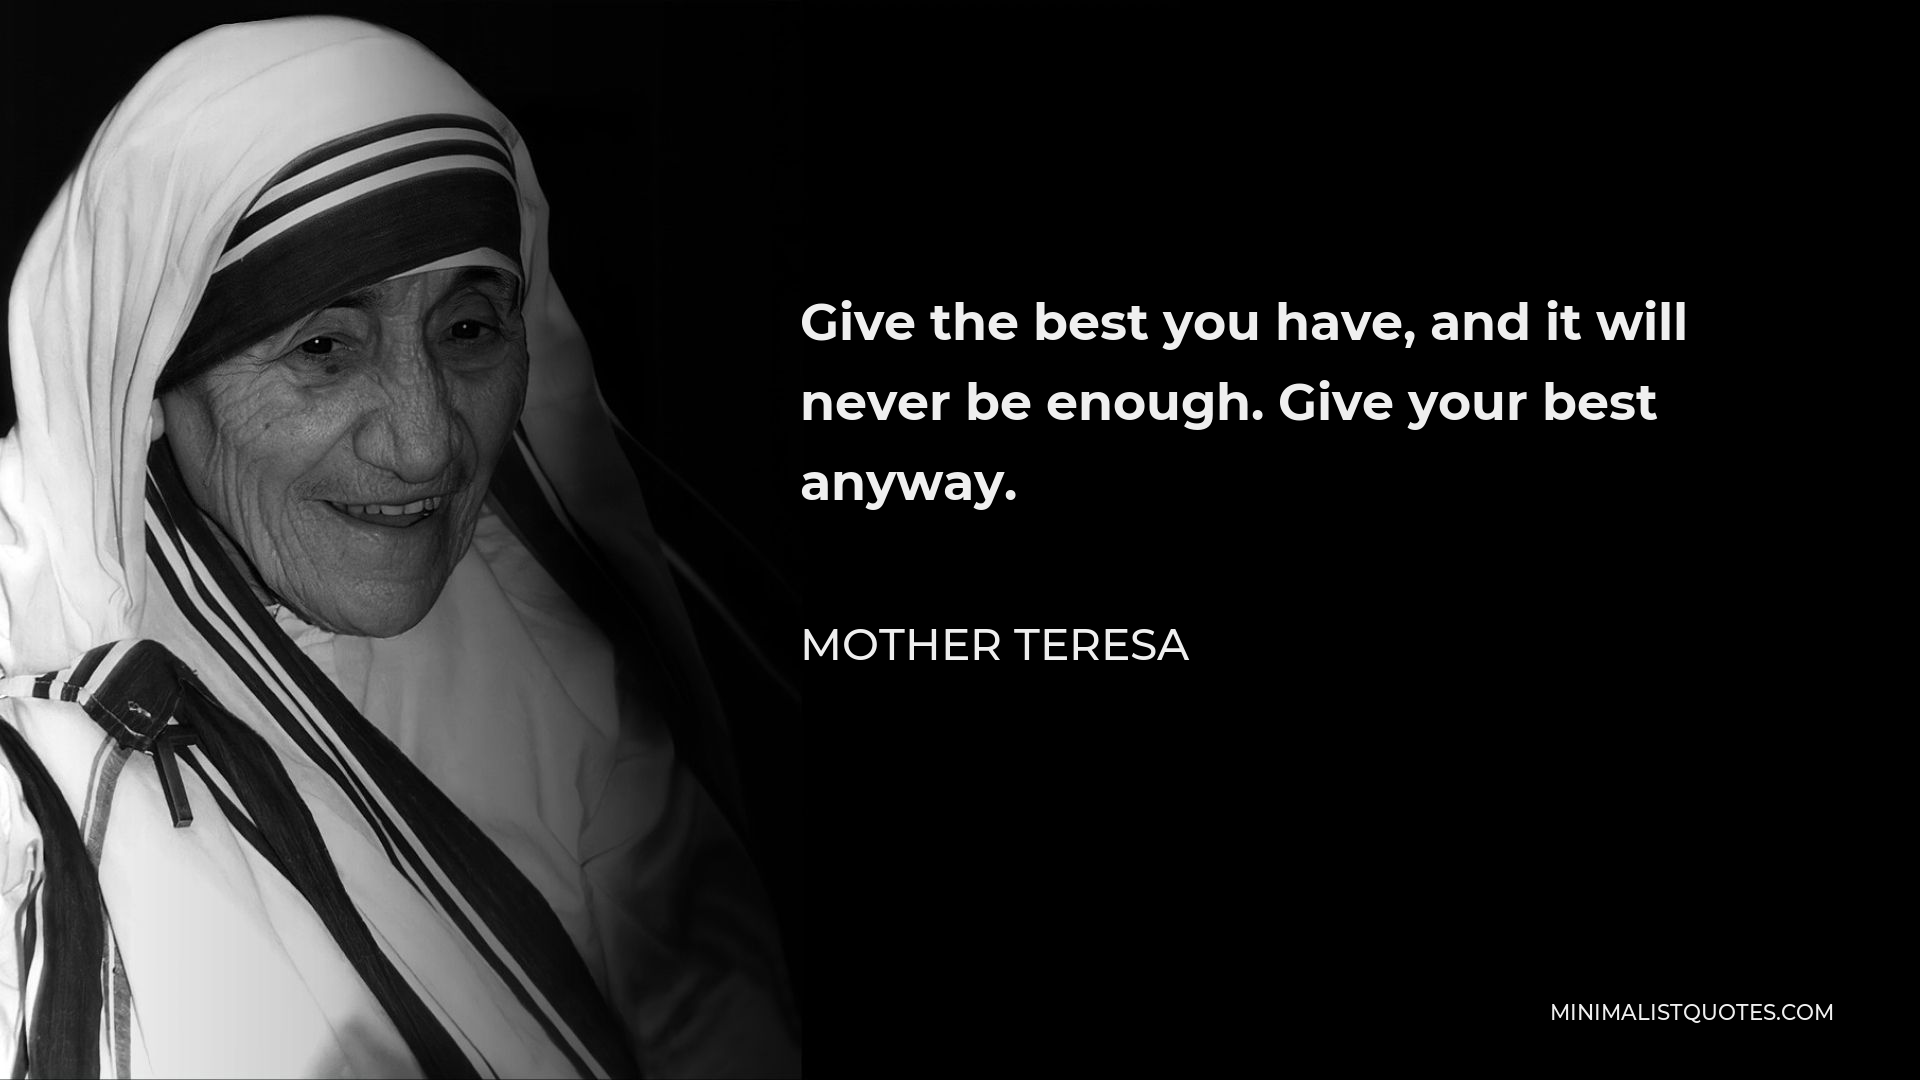 Mother Teresa Quote - Give the best you have, and it will never be enough. Give your best anyway.